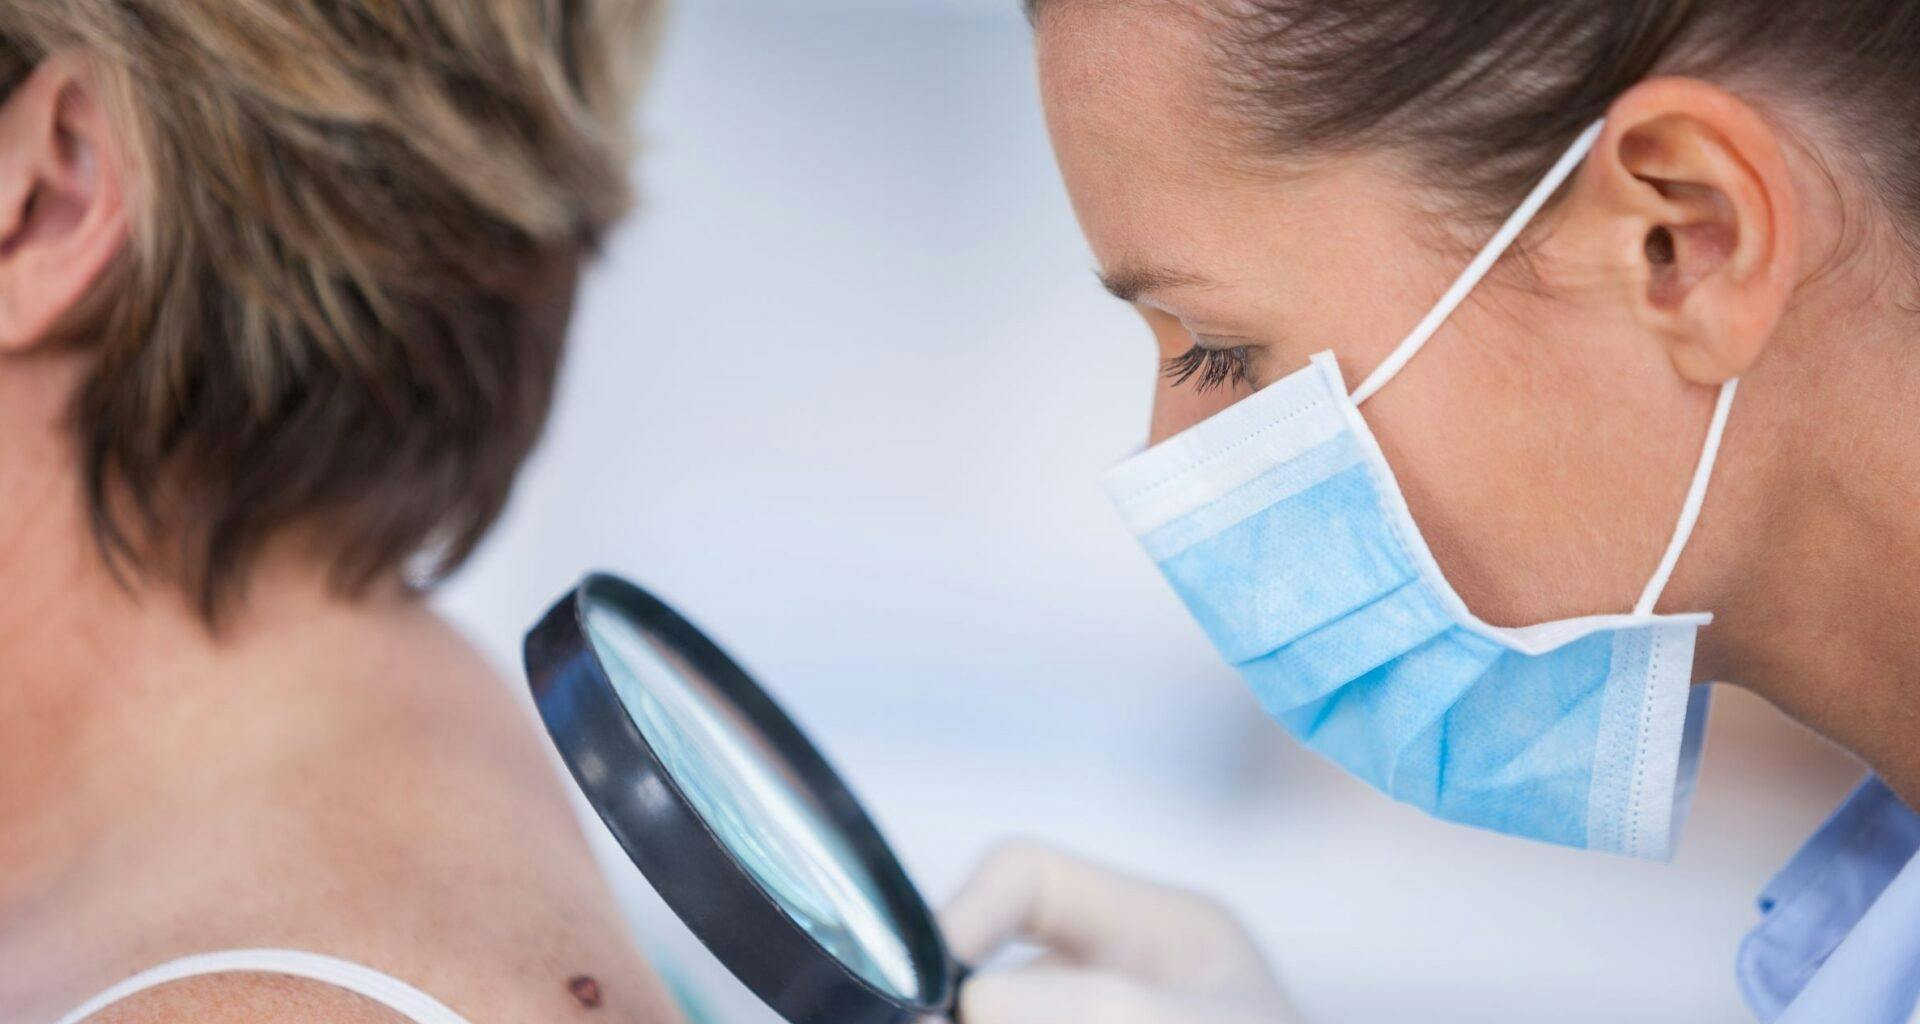 Does Insurance Cover Dermatology? Everything You Need to Know